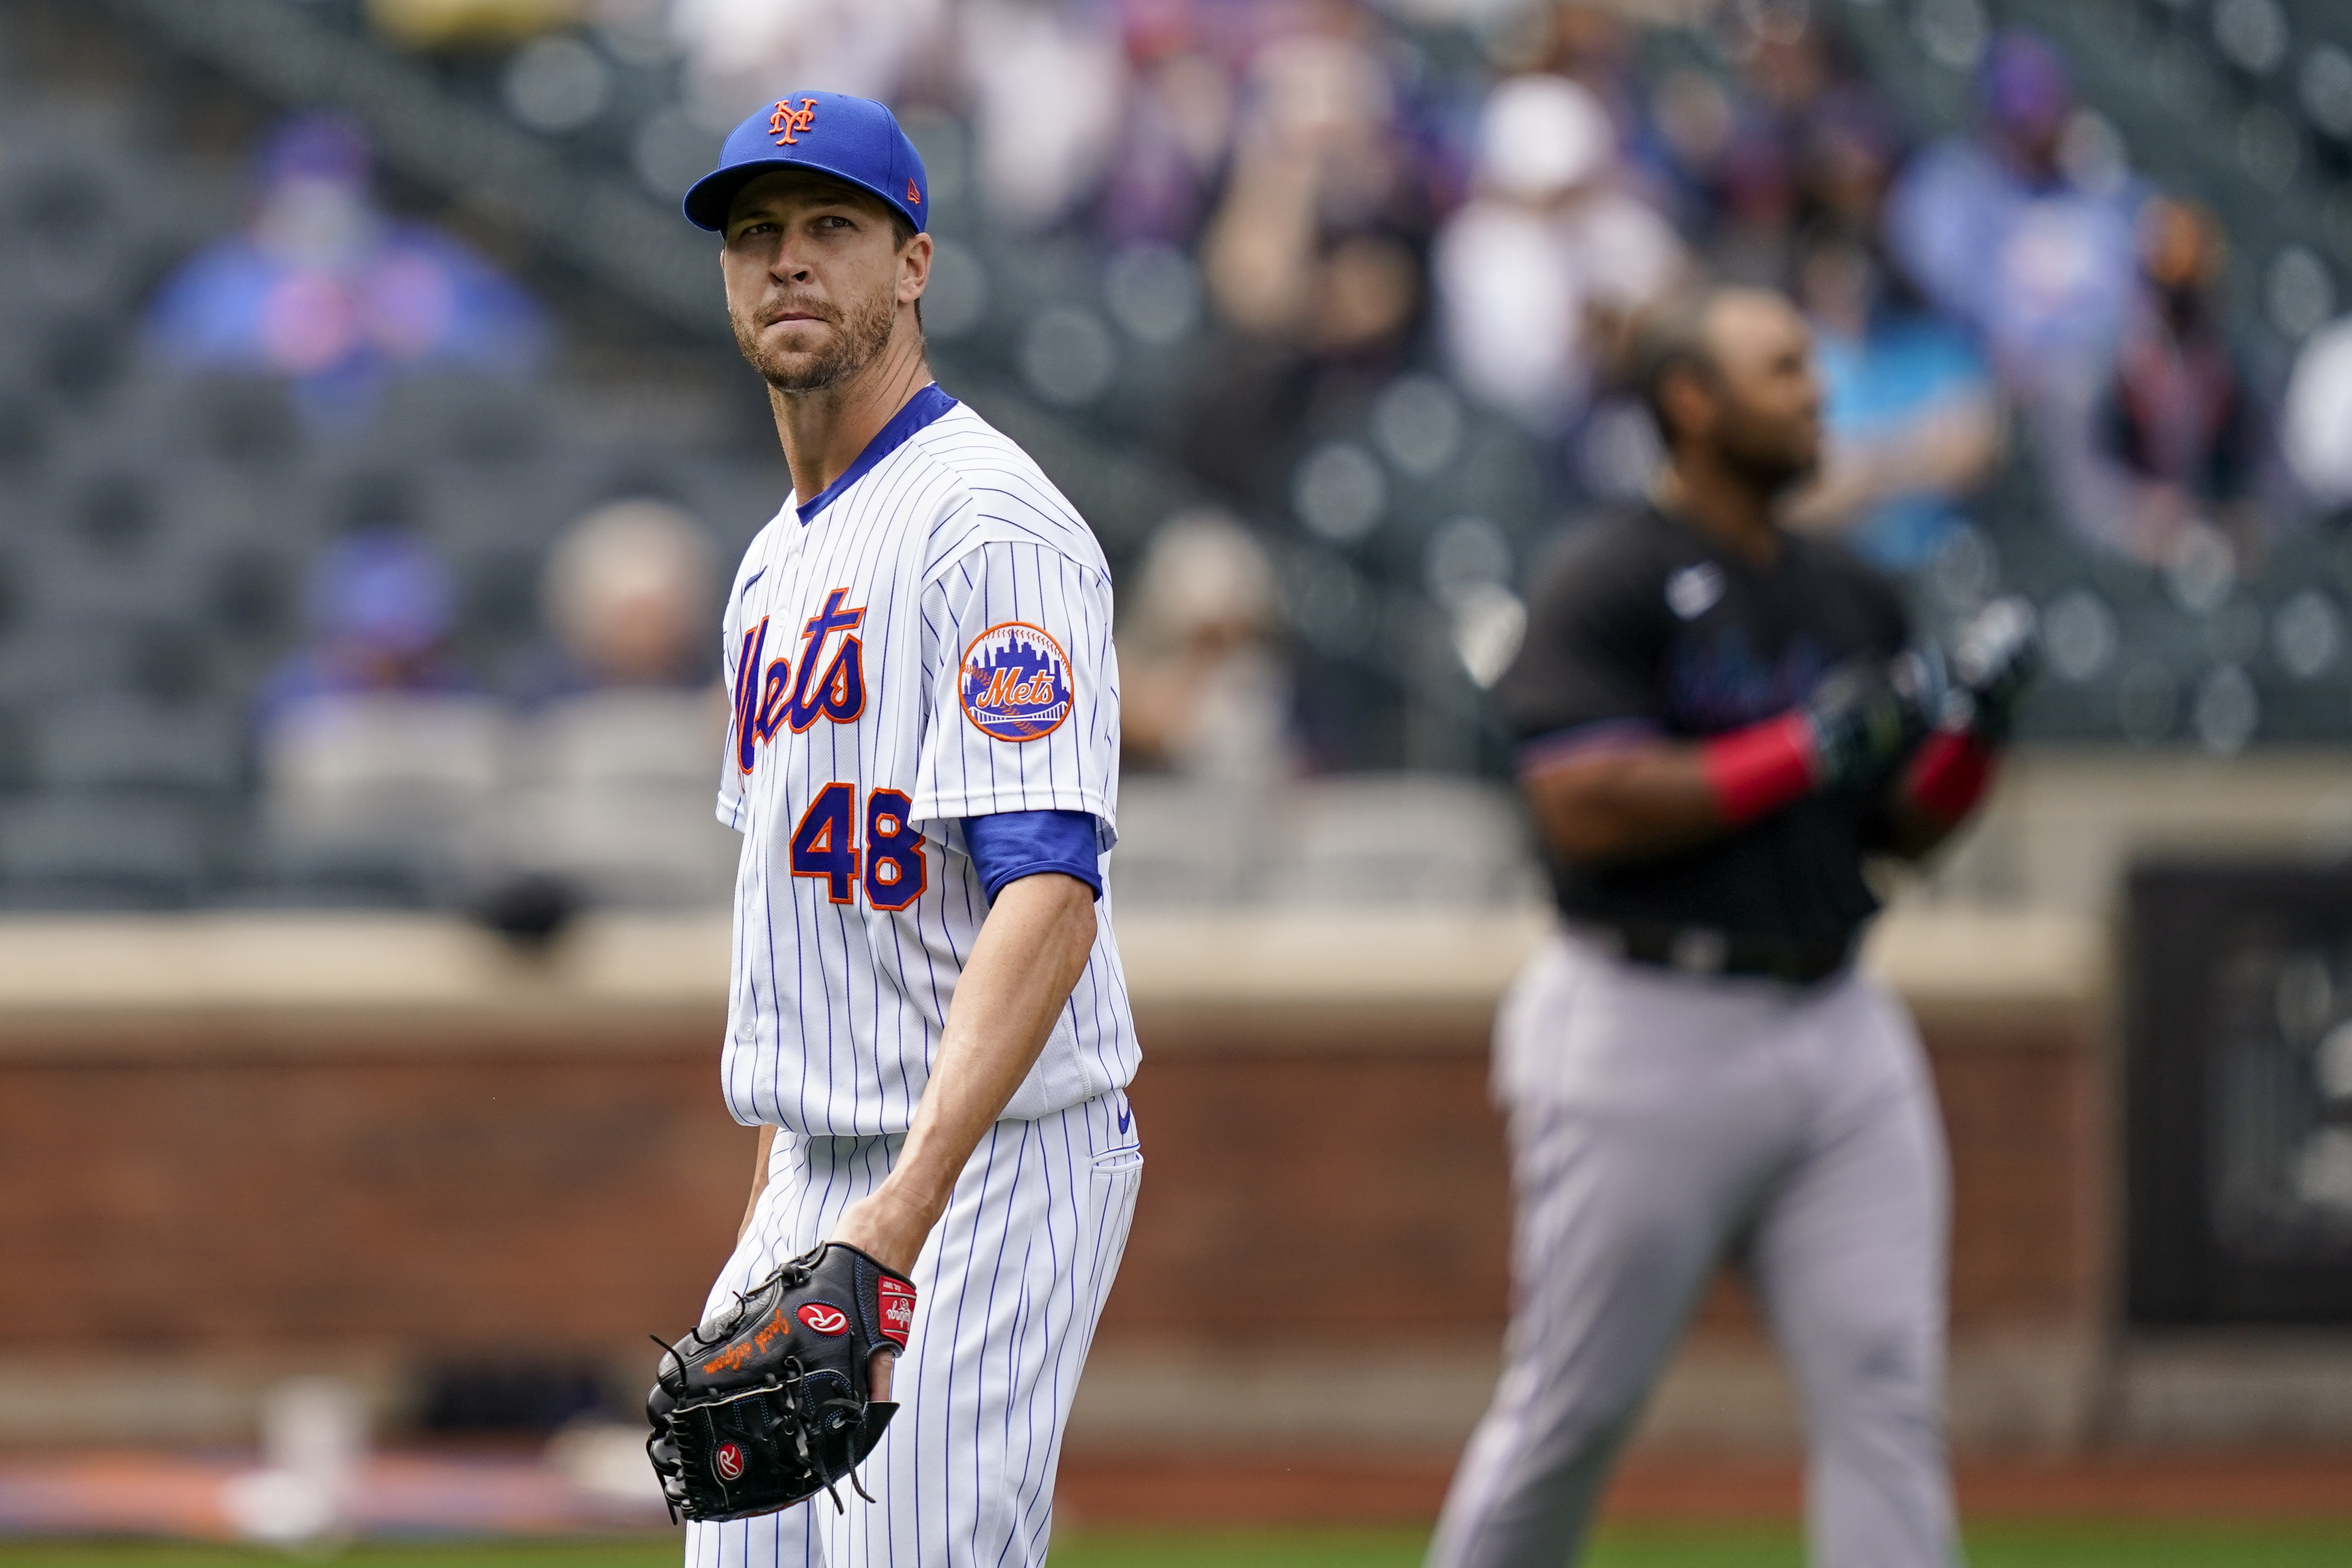 Give Jacob deGrom all the awards 